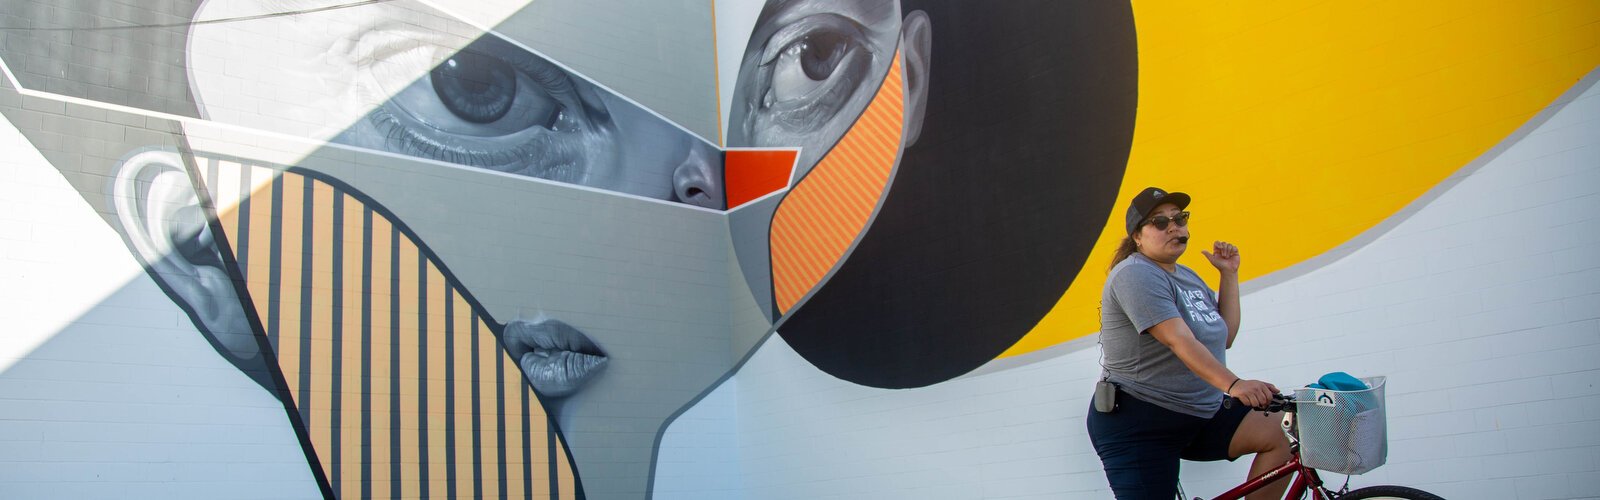 Monica DeChaine describes the work of Belin from Spain who displays masterful details in eyes, often using the faces of his loved ones in his work and recomposing figures into anamorphic distortions.